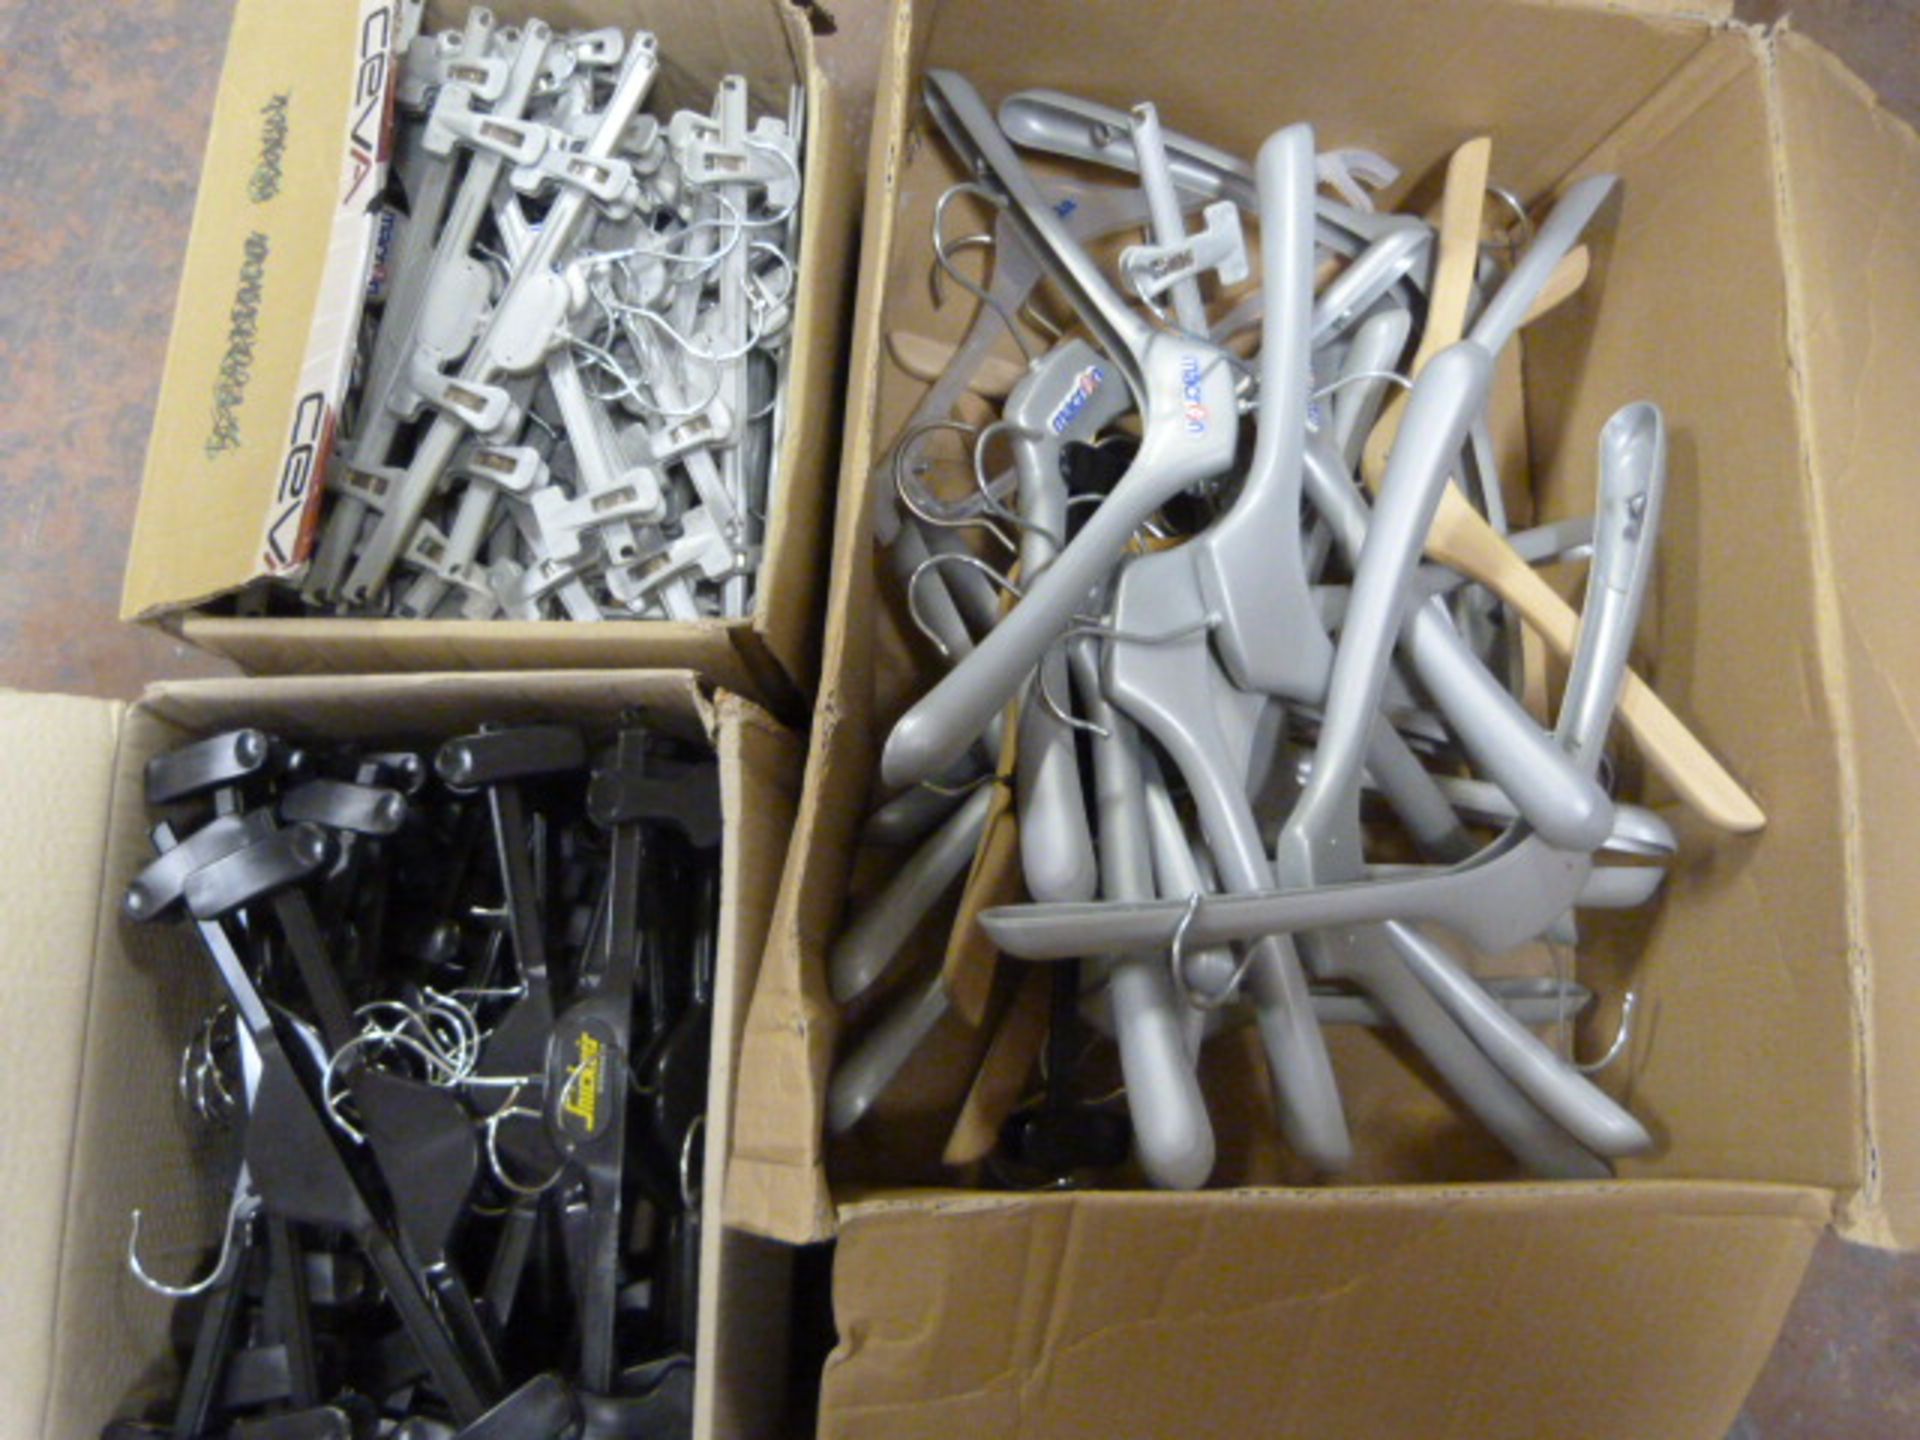 *Three Boxes of Clothes Hangers (Grey & Black)